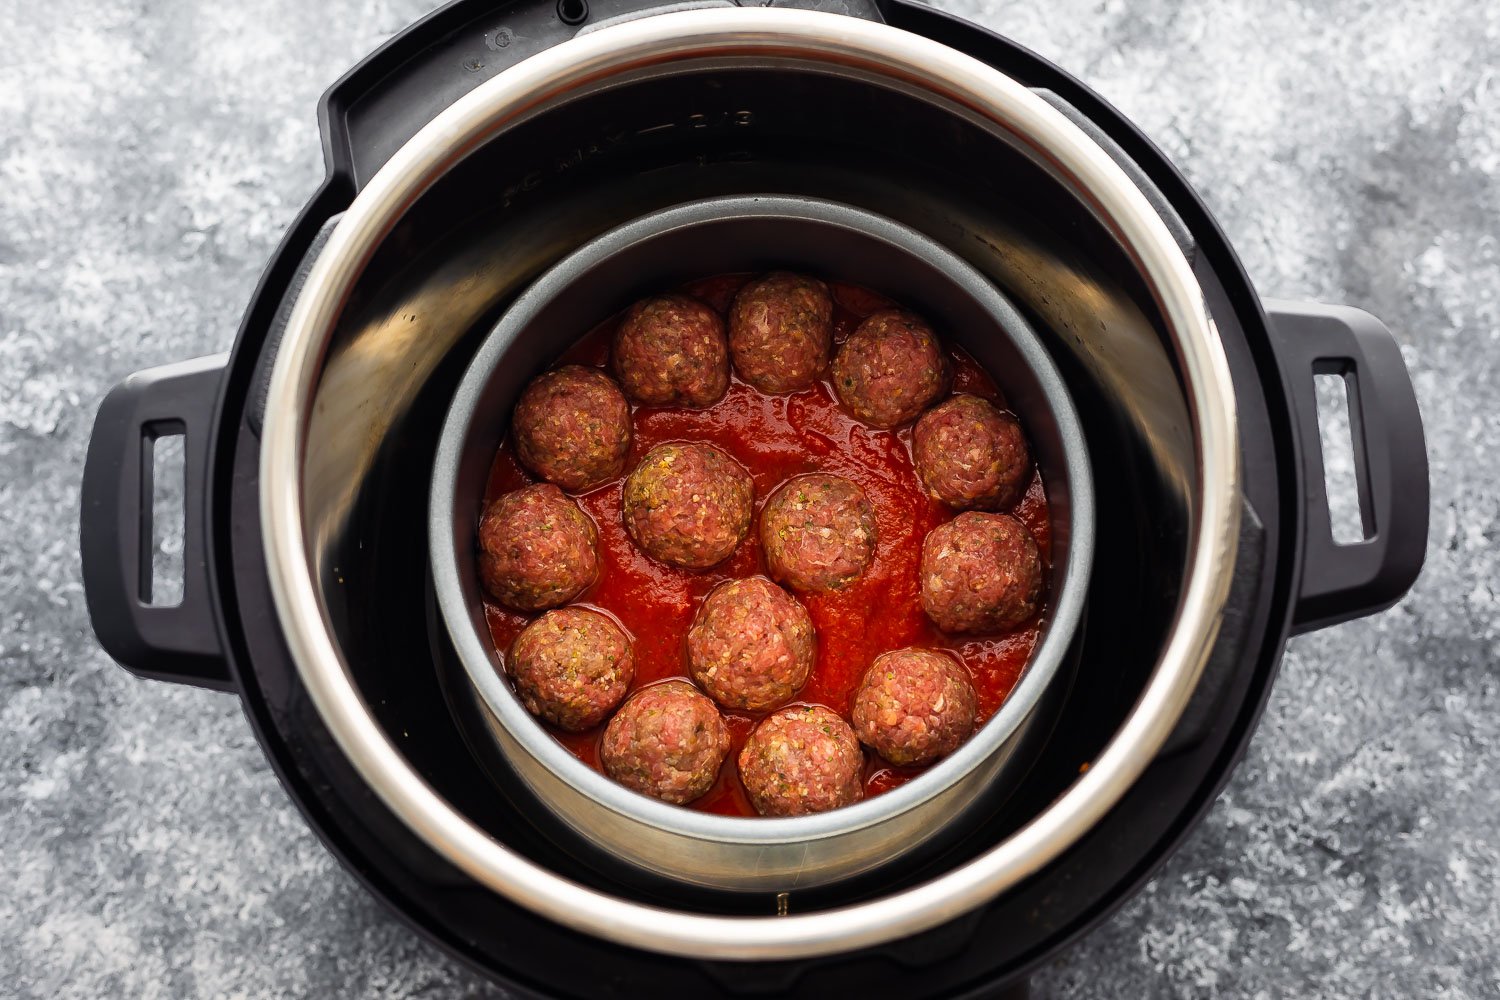 meatballs in marinara sauce inside a cake pan in the instant pot